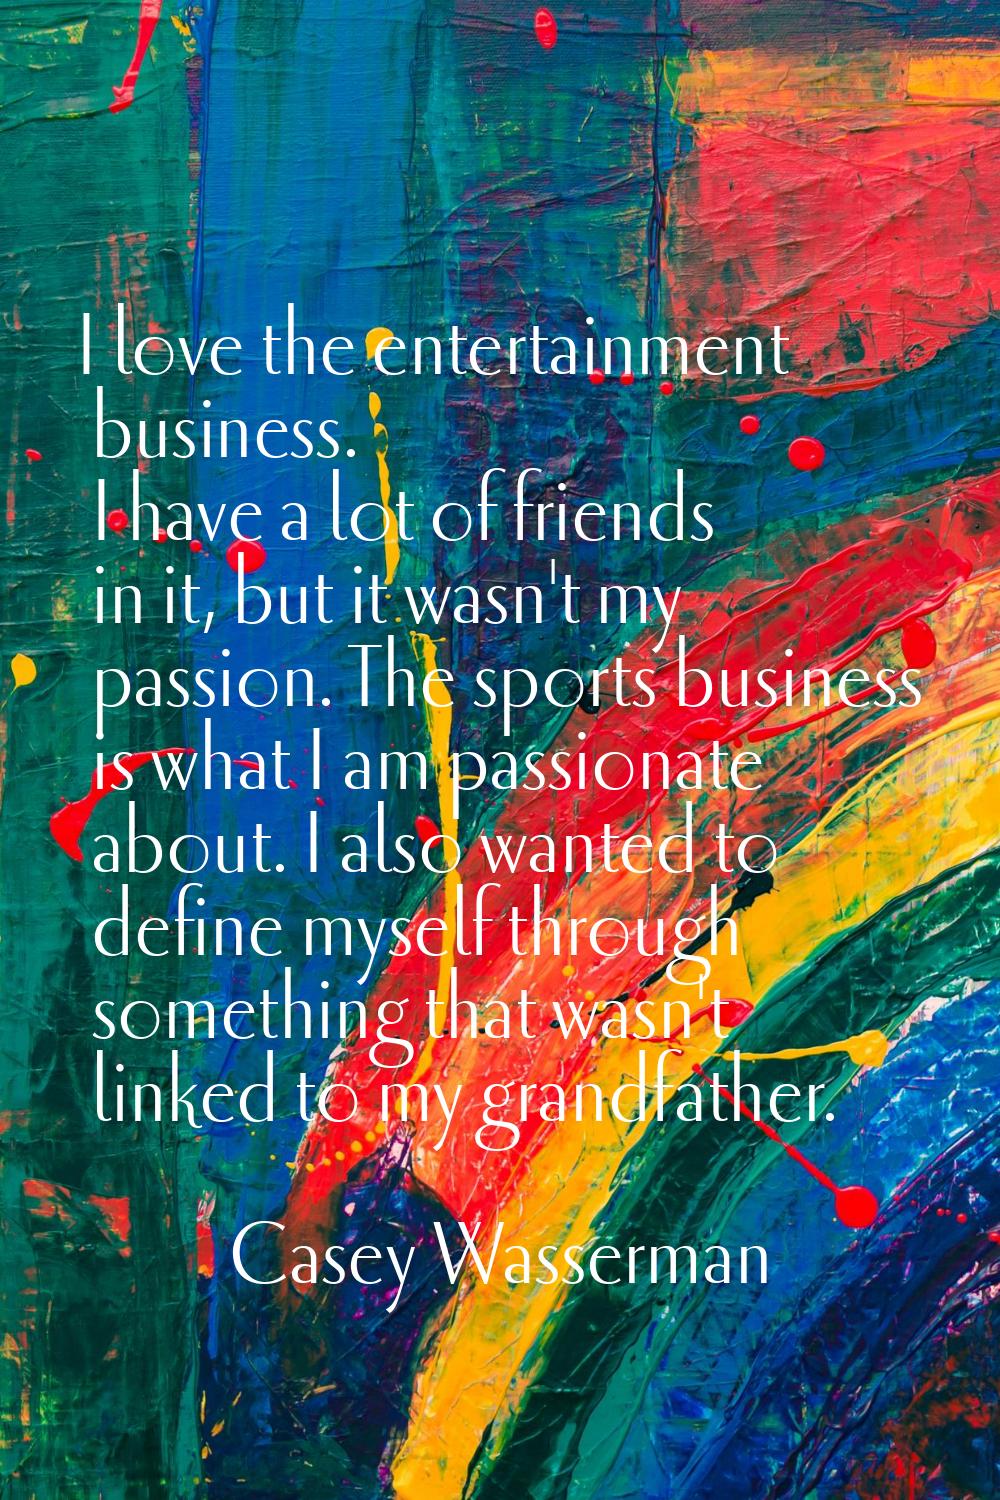 I love the entertainment business. I have a lot of friends in it, but it wasn't my passion. The spo